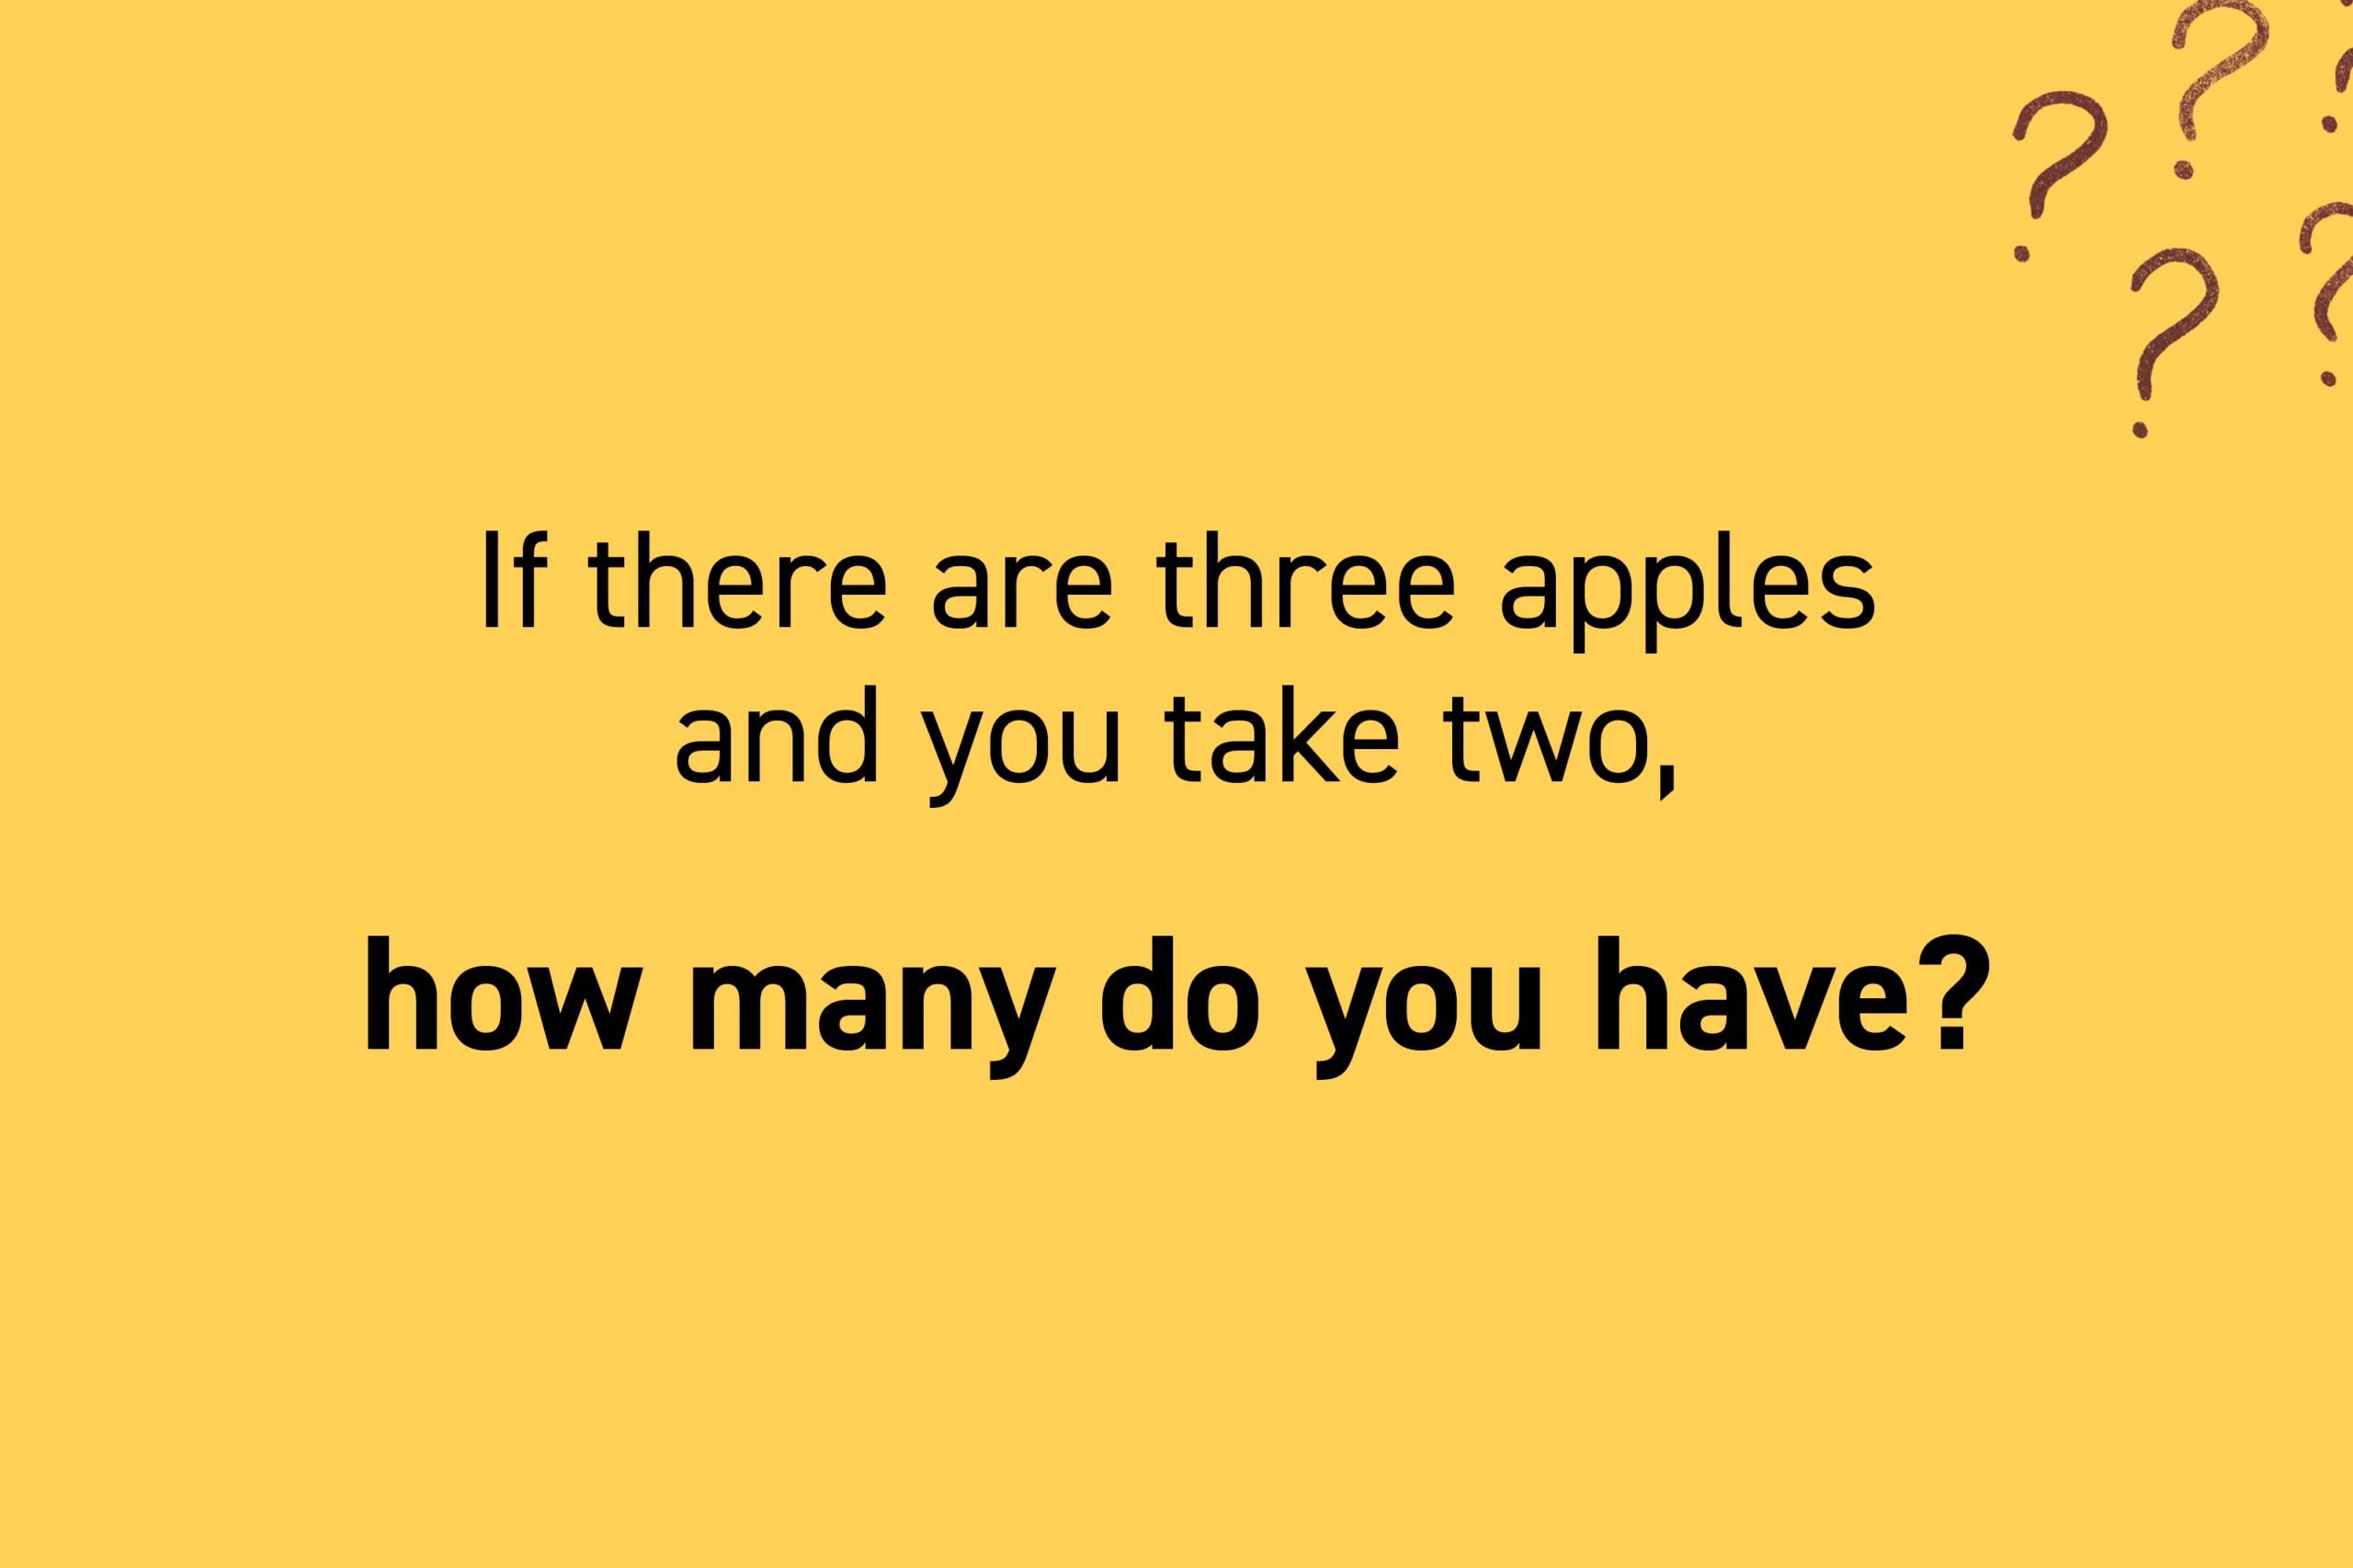 If there are three apples and you take two, how many do you have?